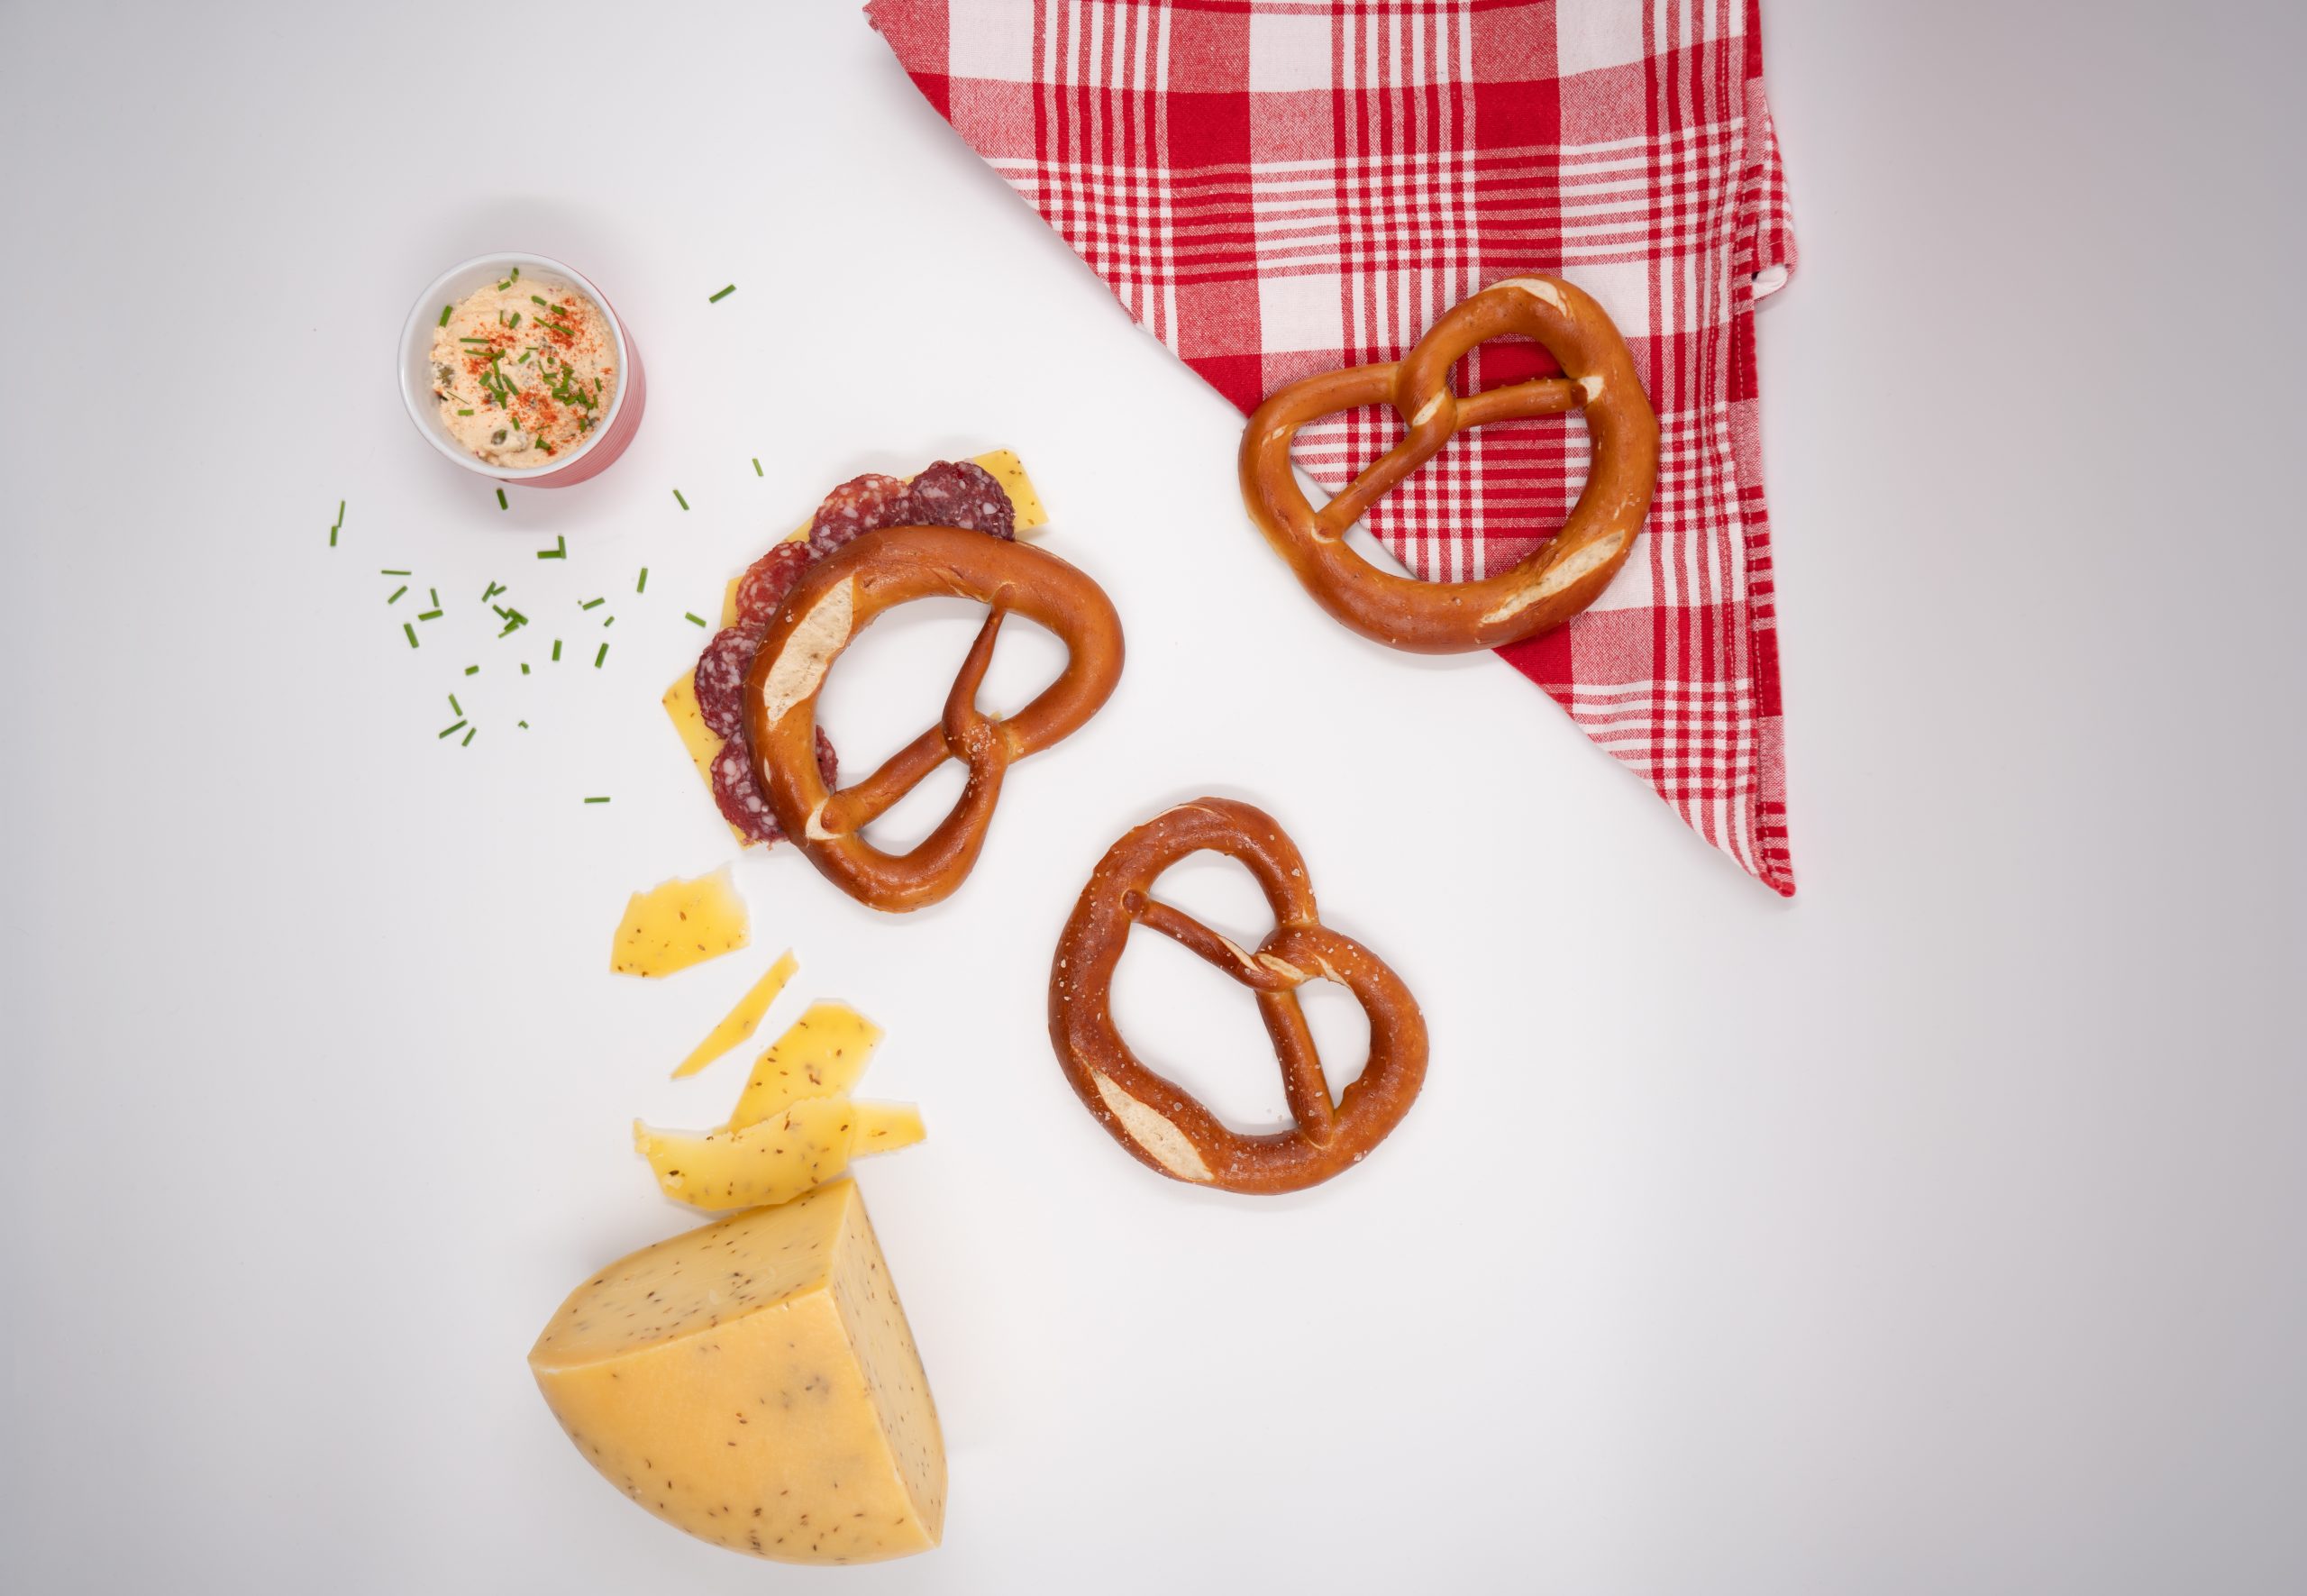 dough pretzels on white background with a block of cheese and red tartan cloth